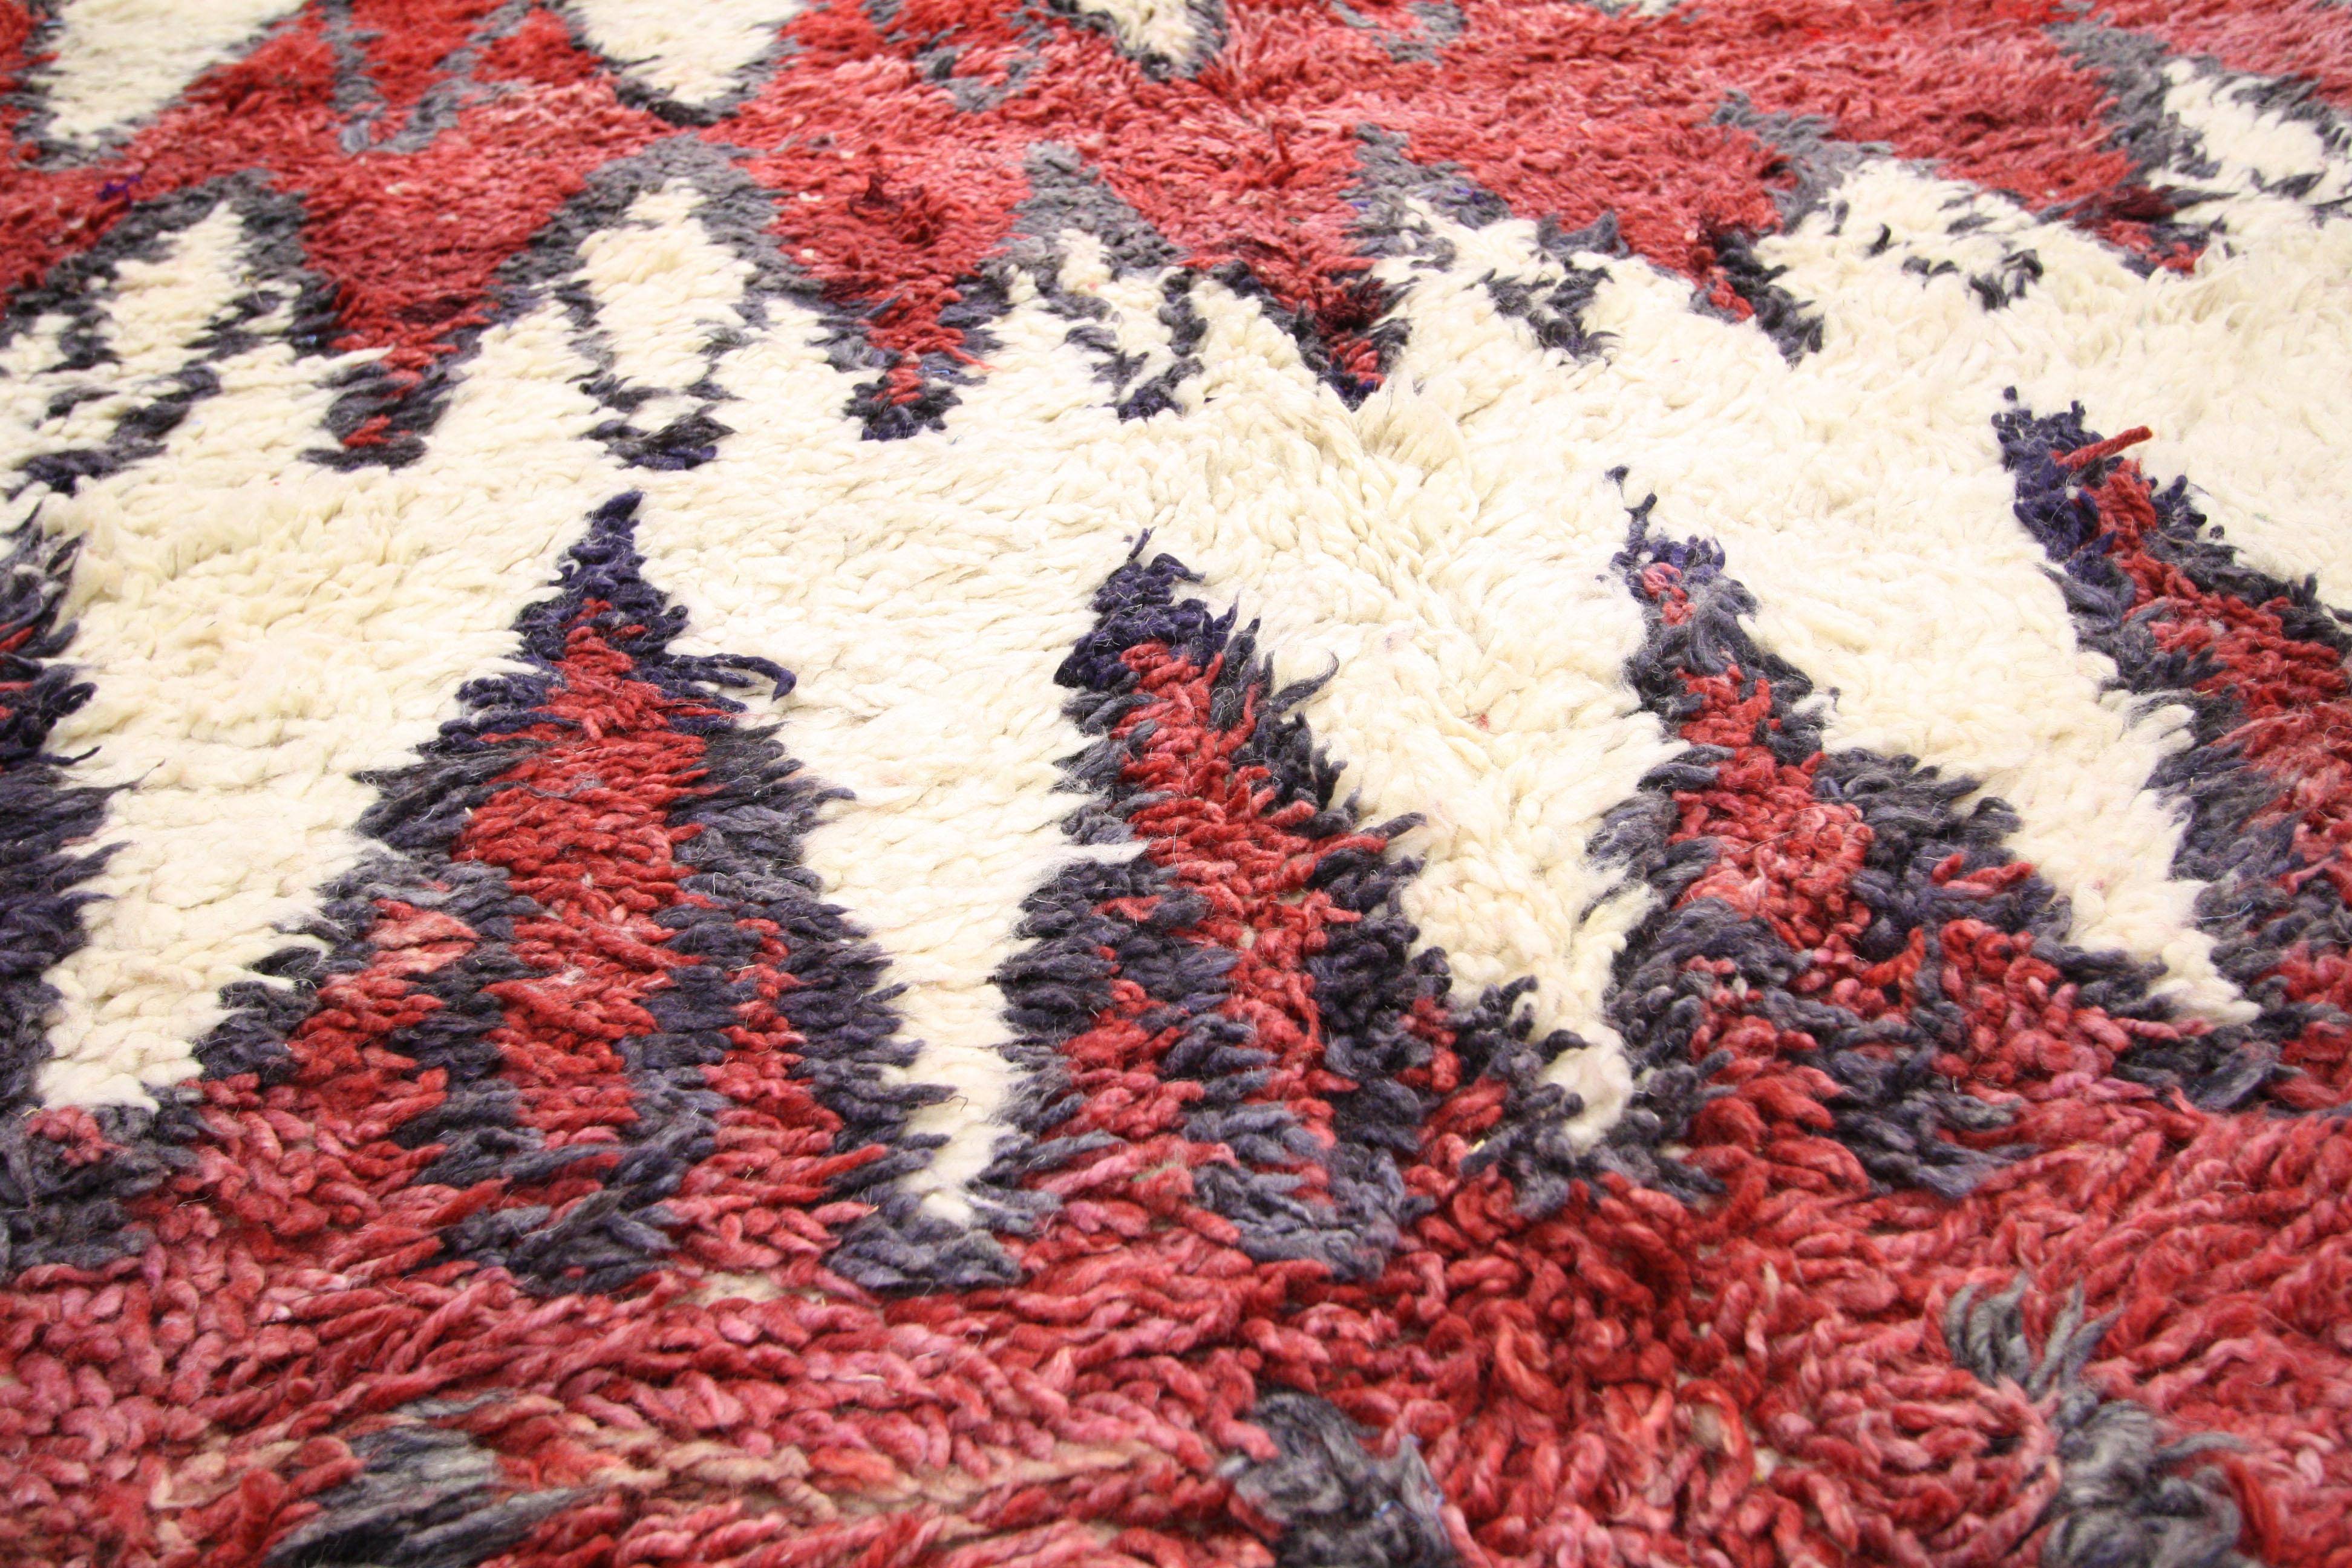 20678, vintage Berber Moroccan rug with tribal style, Moroccan Berber carpet. This hand-knotted wool vintage Berber Moroccan rug with tribal style displays four rows of red lozenge and zigzag lines outlined in charcoal on a creamy, vanilla-beige